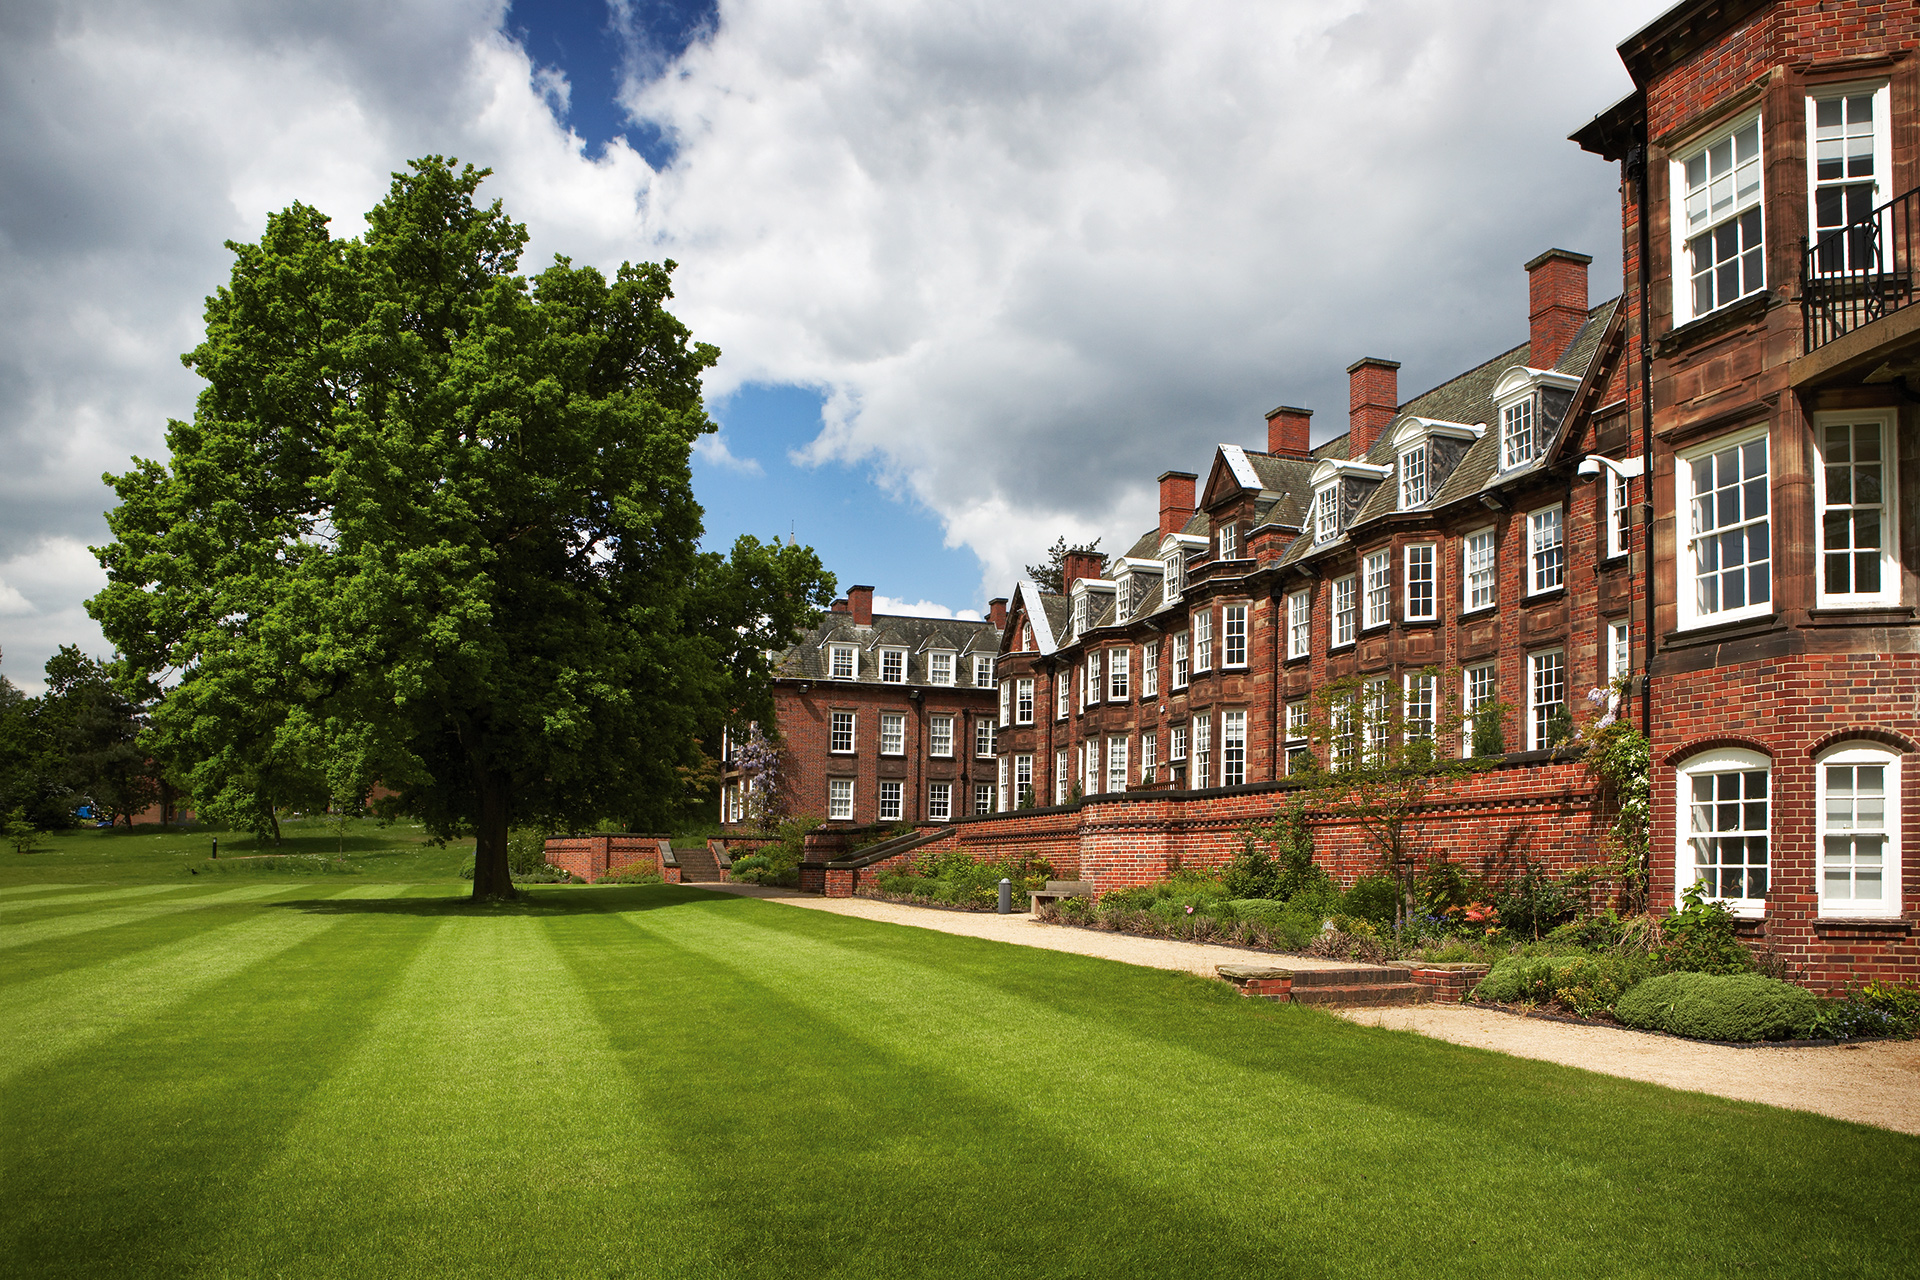 The red brick building of Birmingham Business School with its perfectly manicured lawn